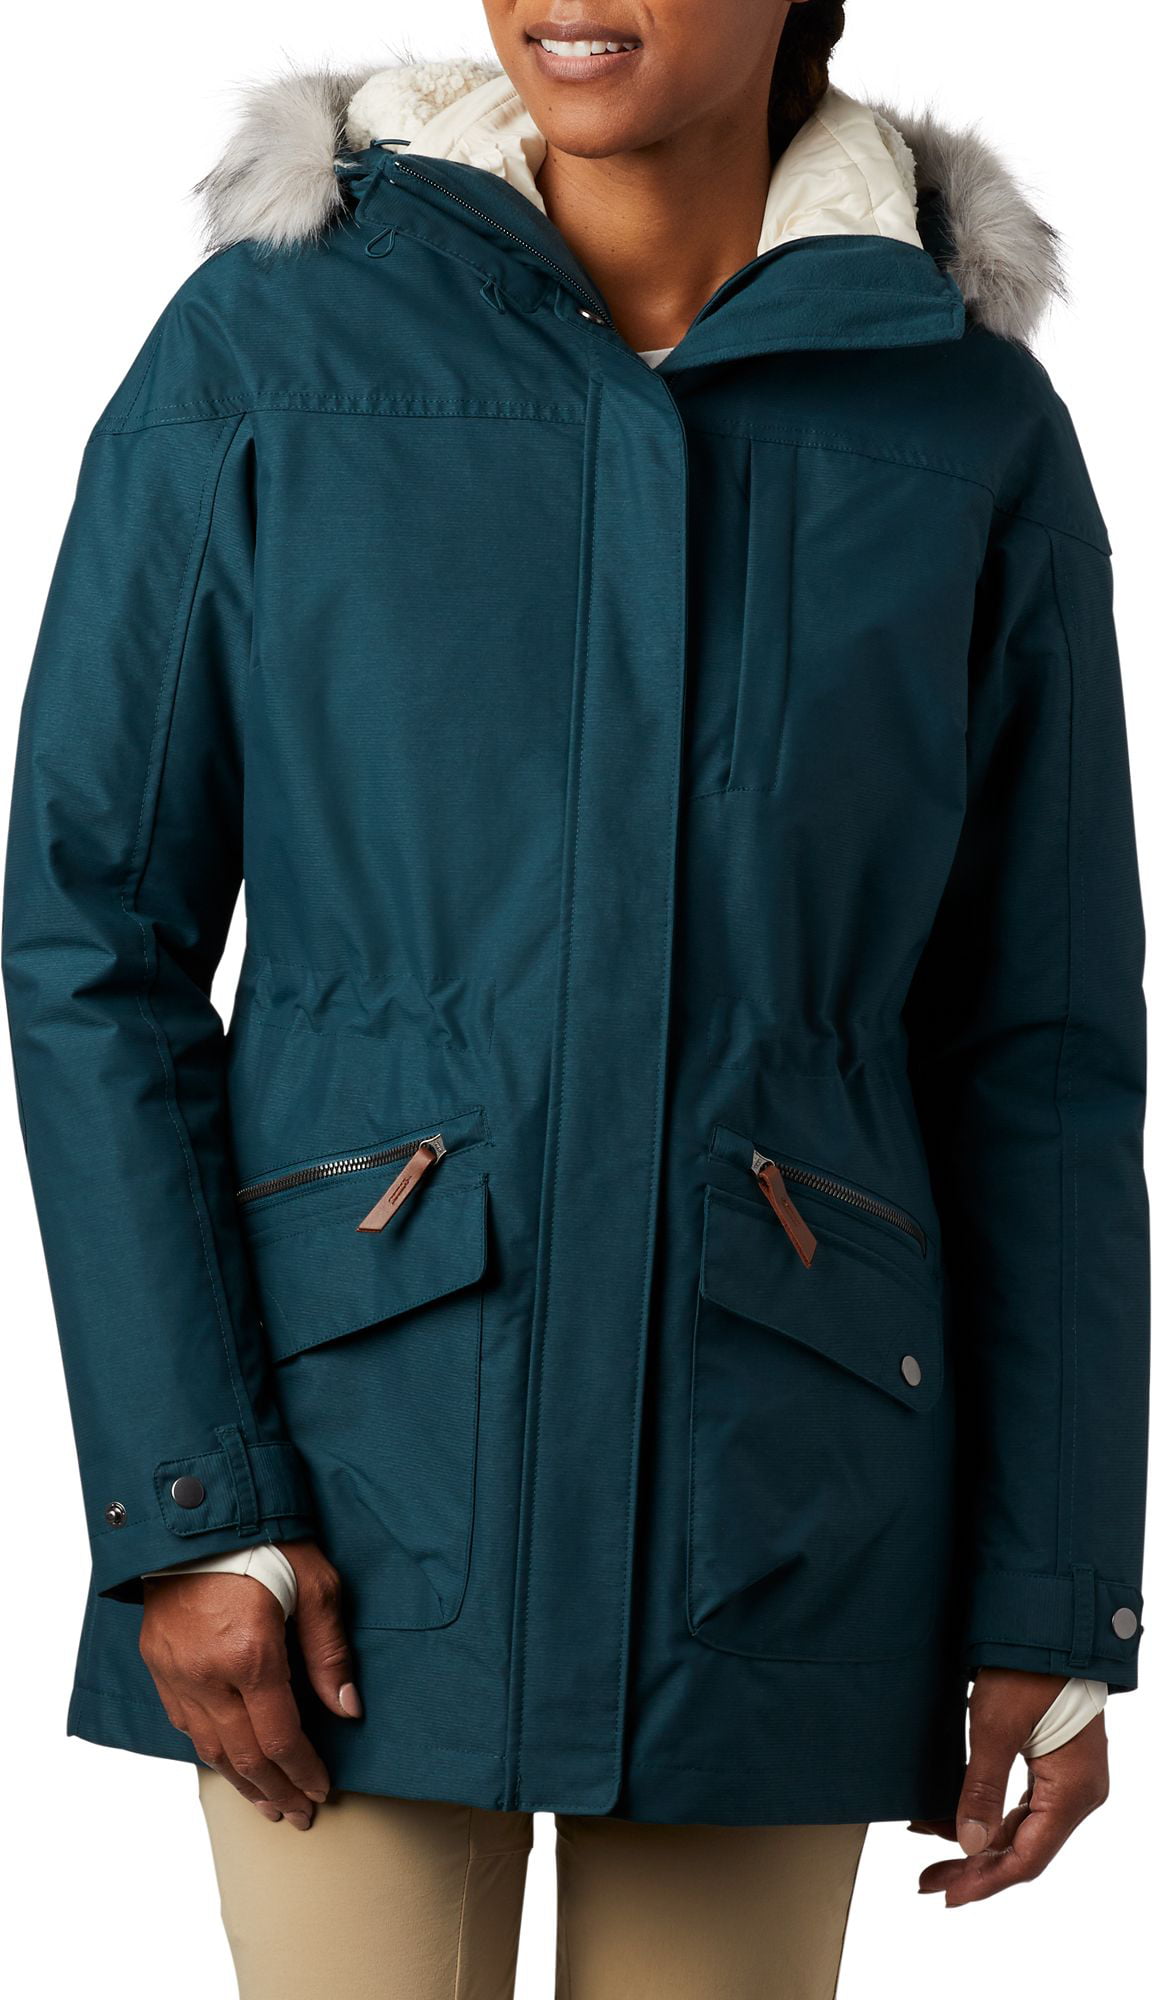 columbia 3 in 1 jacket